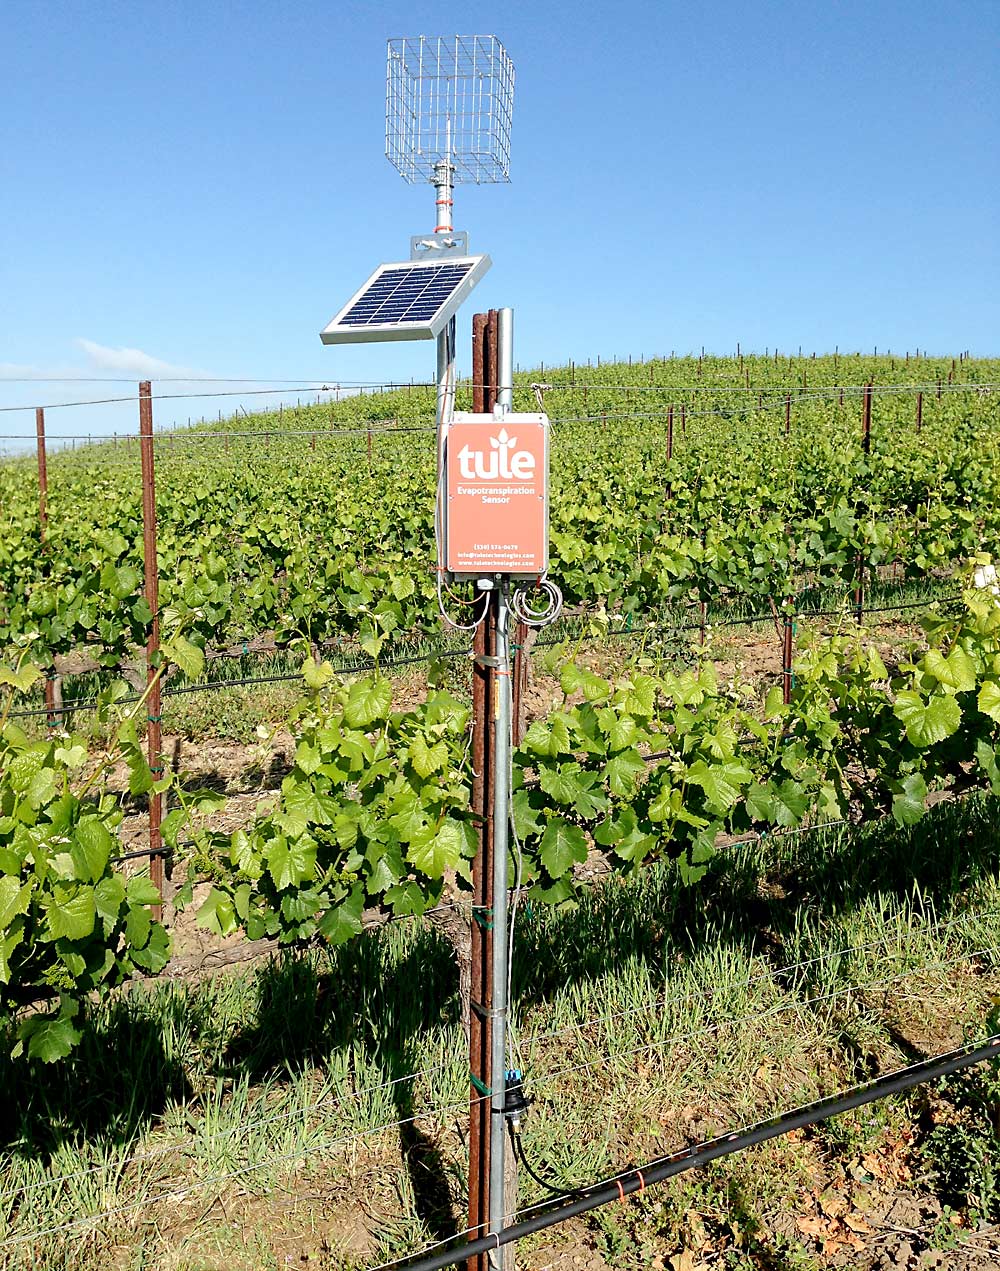 The Tule Technology system measures the actual evapotranspiration from a given block, helping growers to decide when and how much to irrigate, according to founder Tom Shapland. (Courtesy Tule Technology)